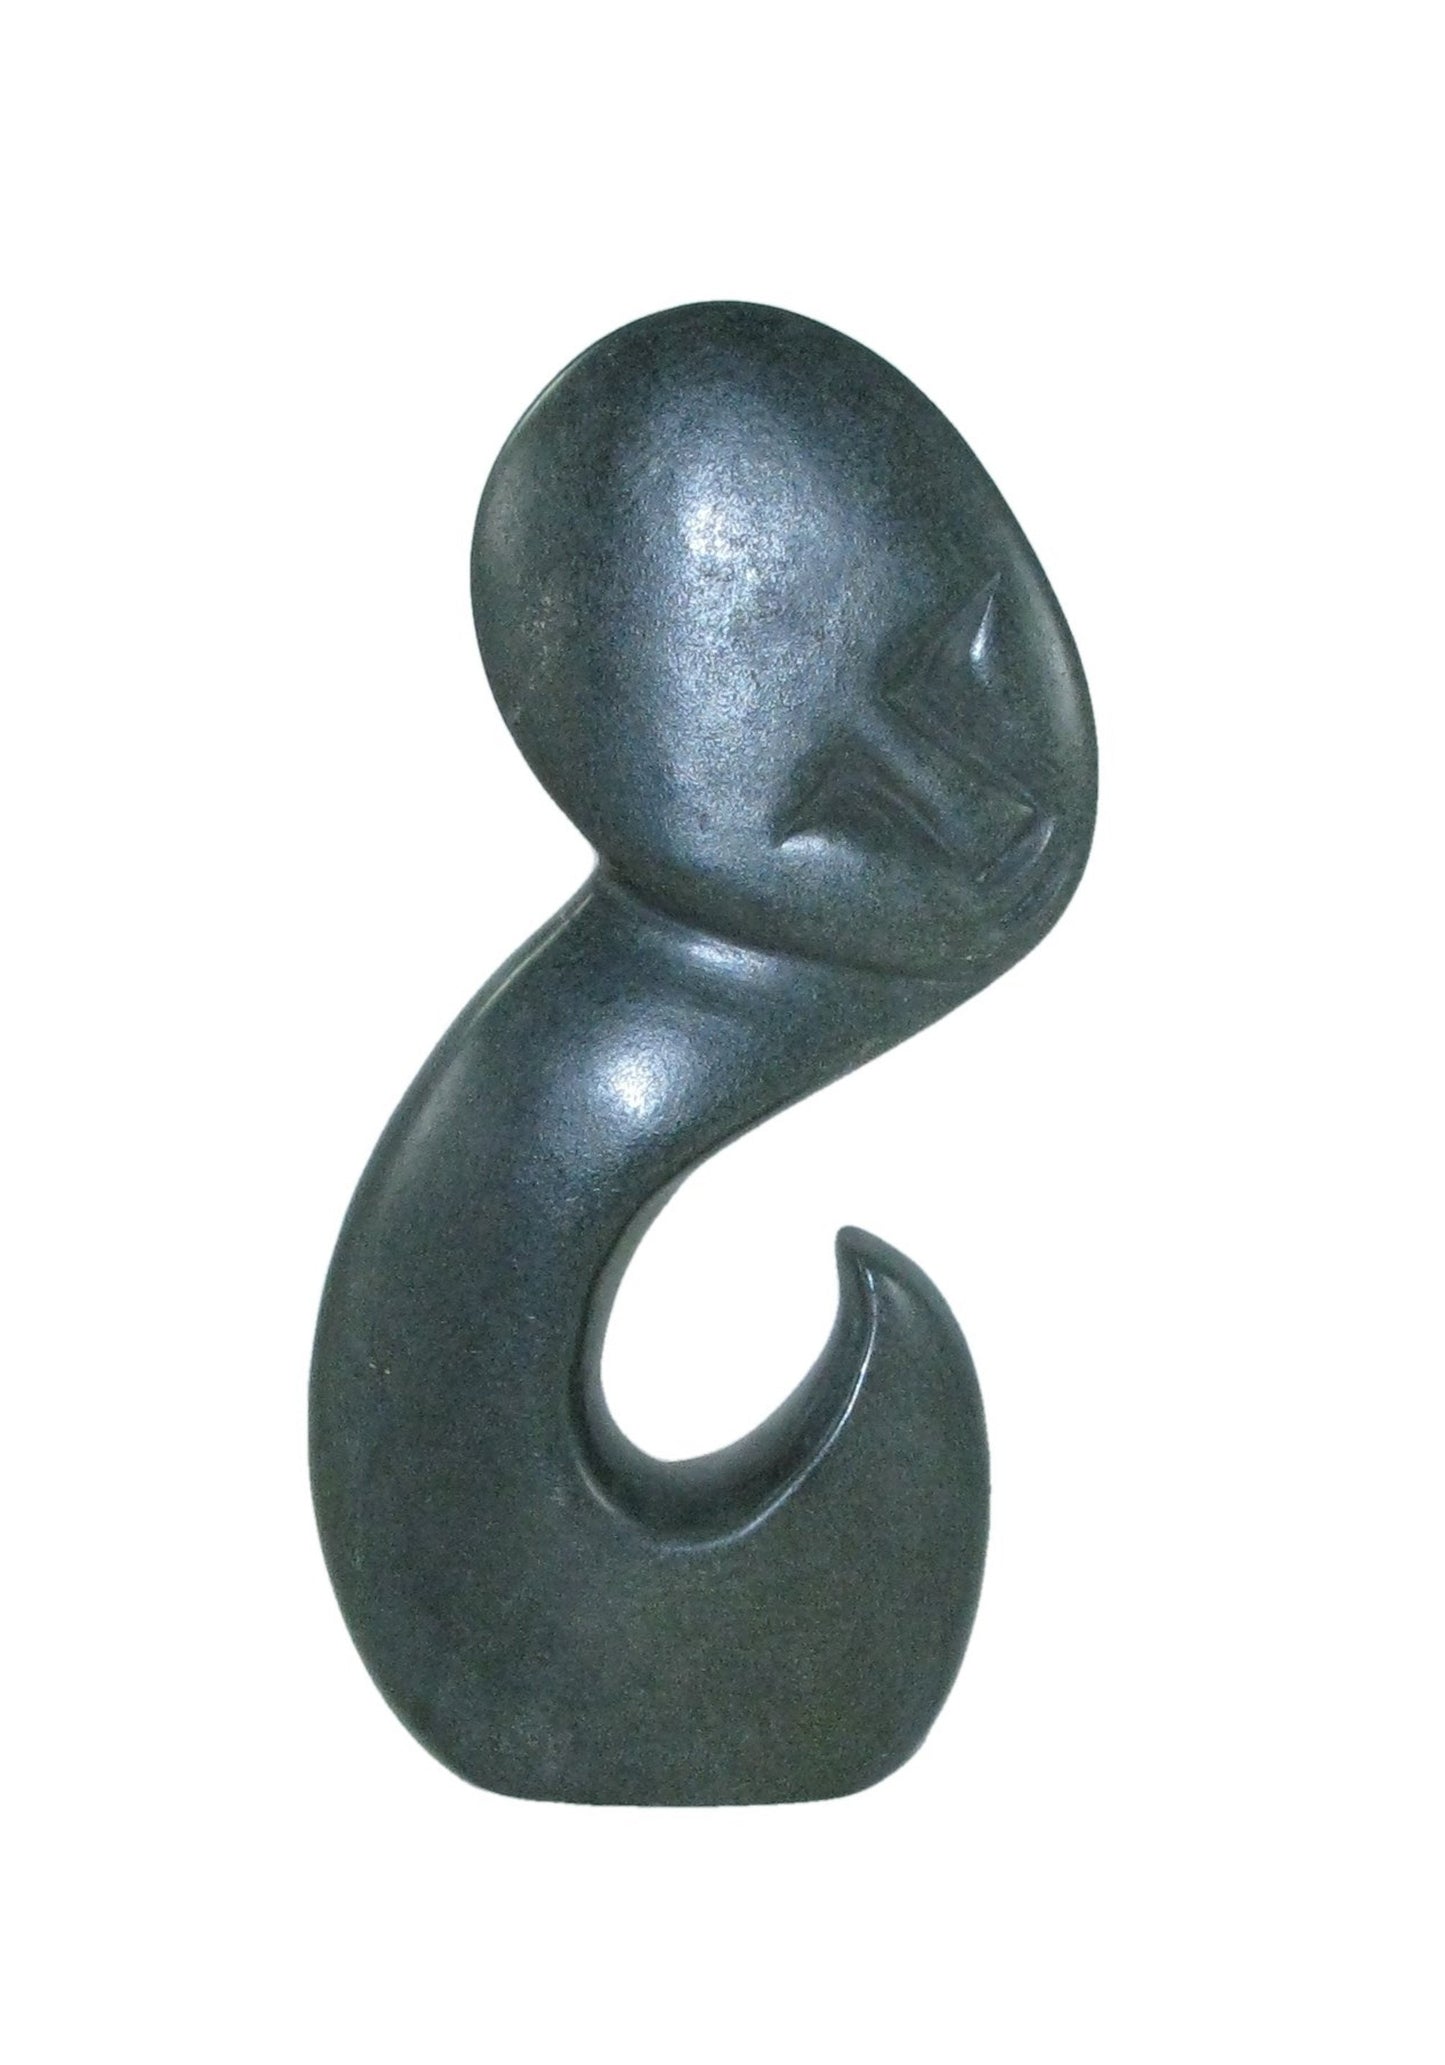 African Shona Thinker Sculpture in Serpentine Stone 15 cm Fair Trade African Art with Story-card